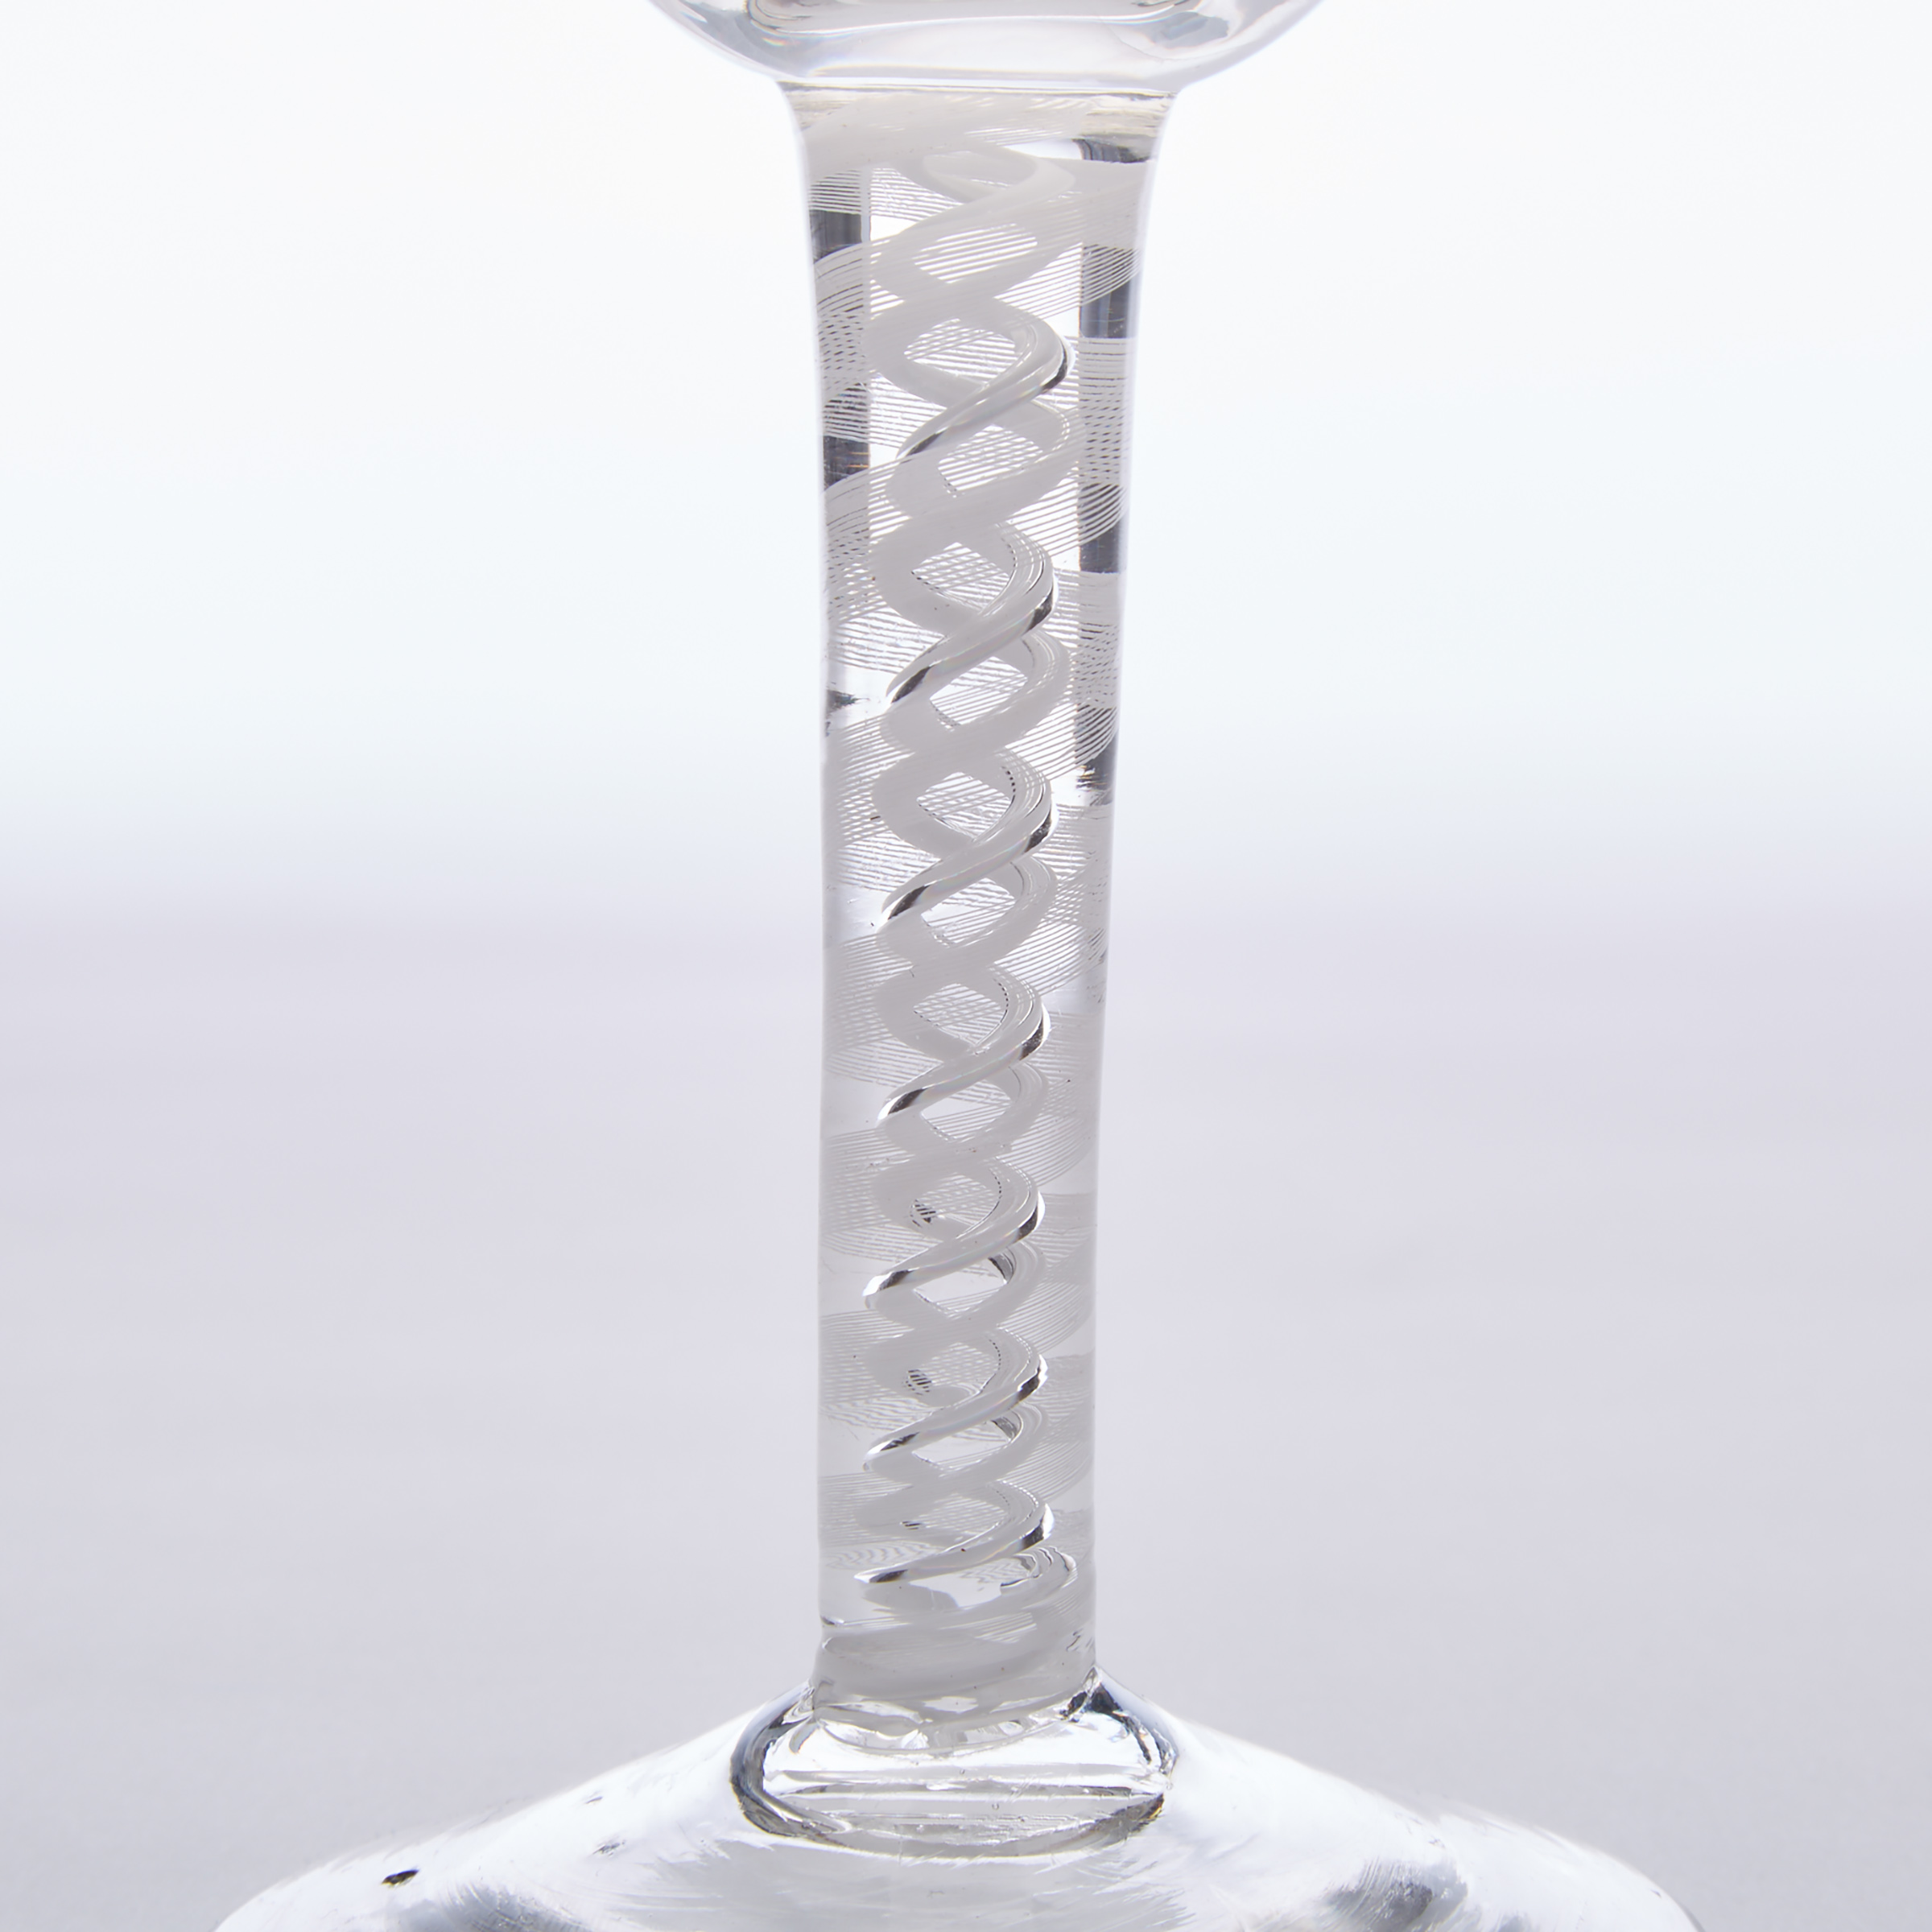 English Mixed Twist Stemmed Glass Goblet, c.1760-70